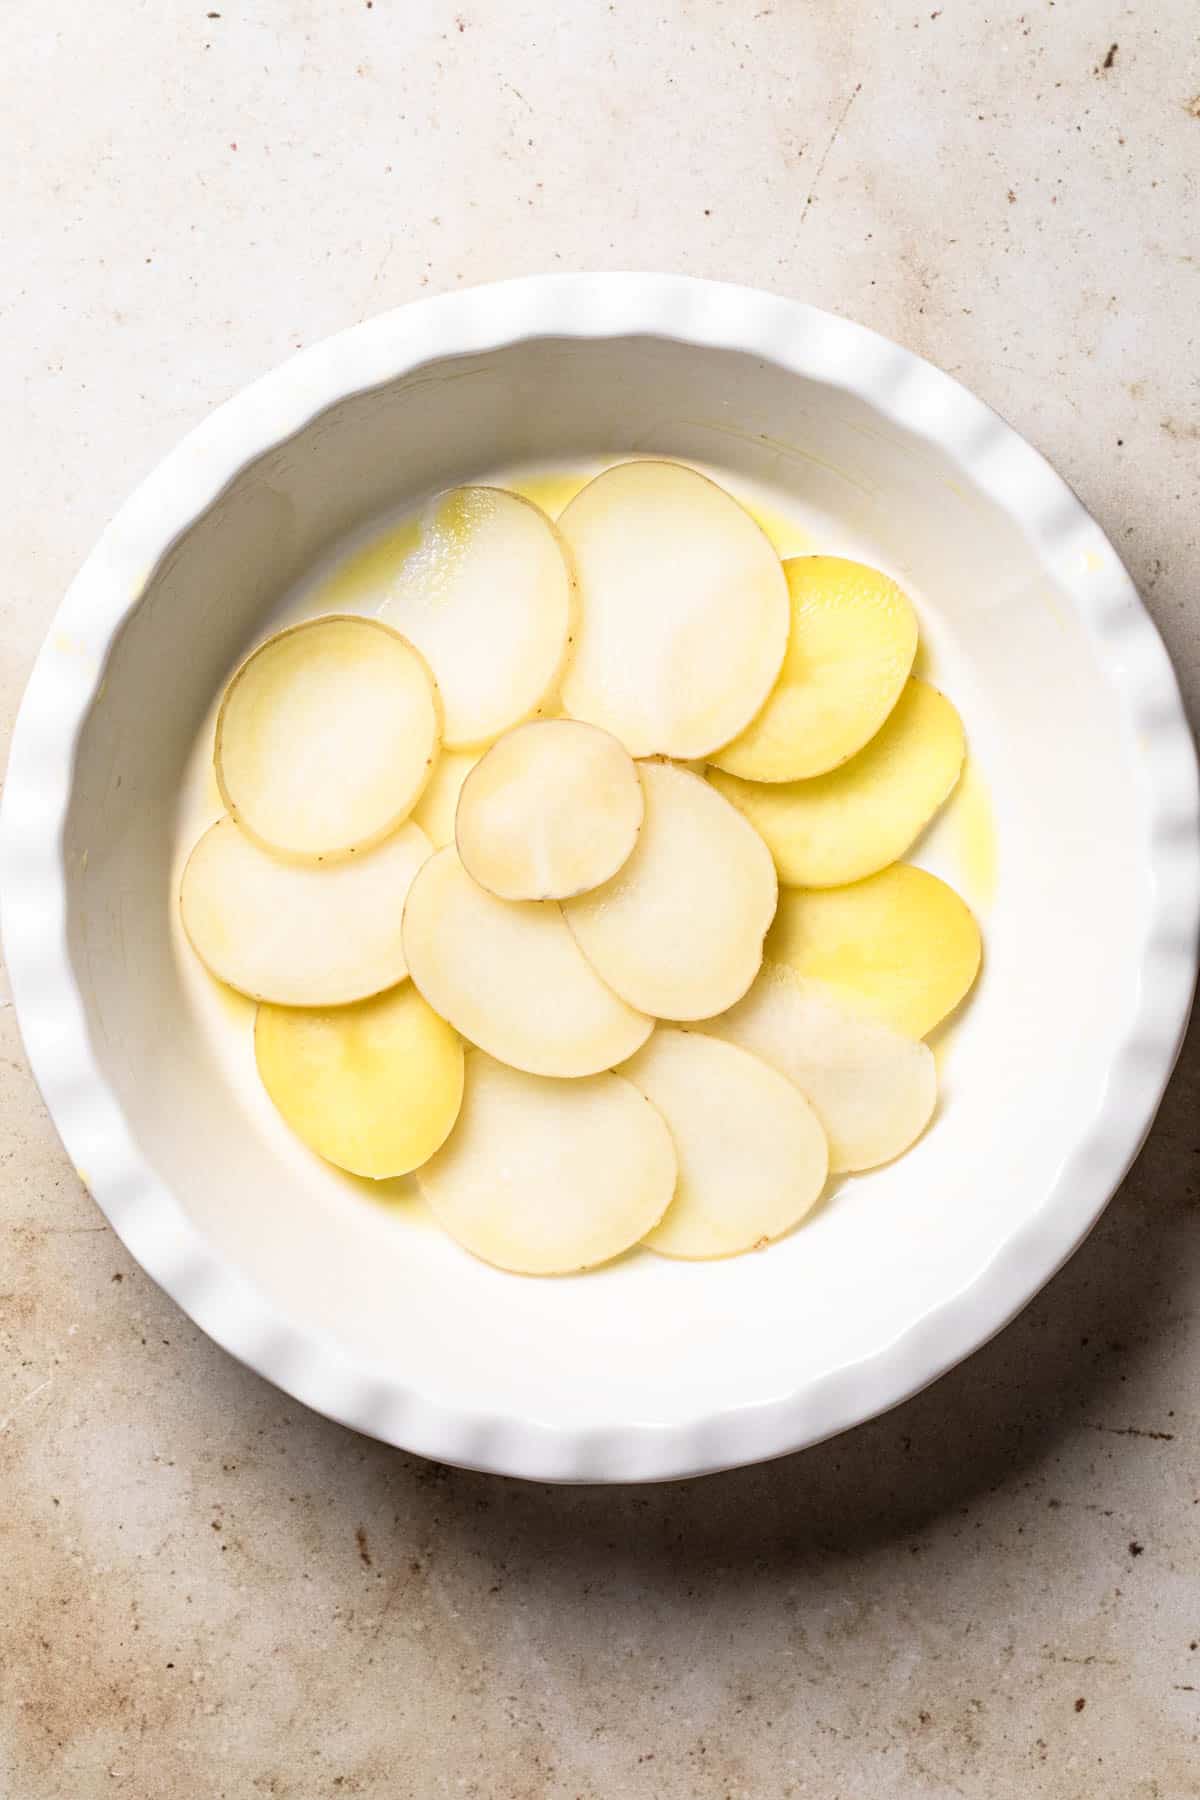 Cooked thin slices of potato in a quiche dish.